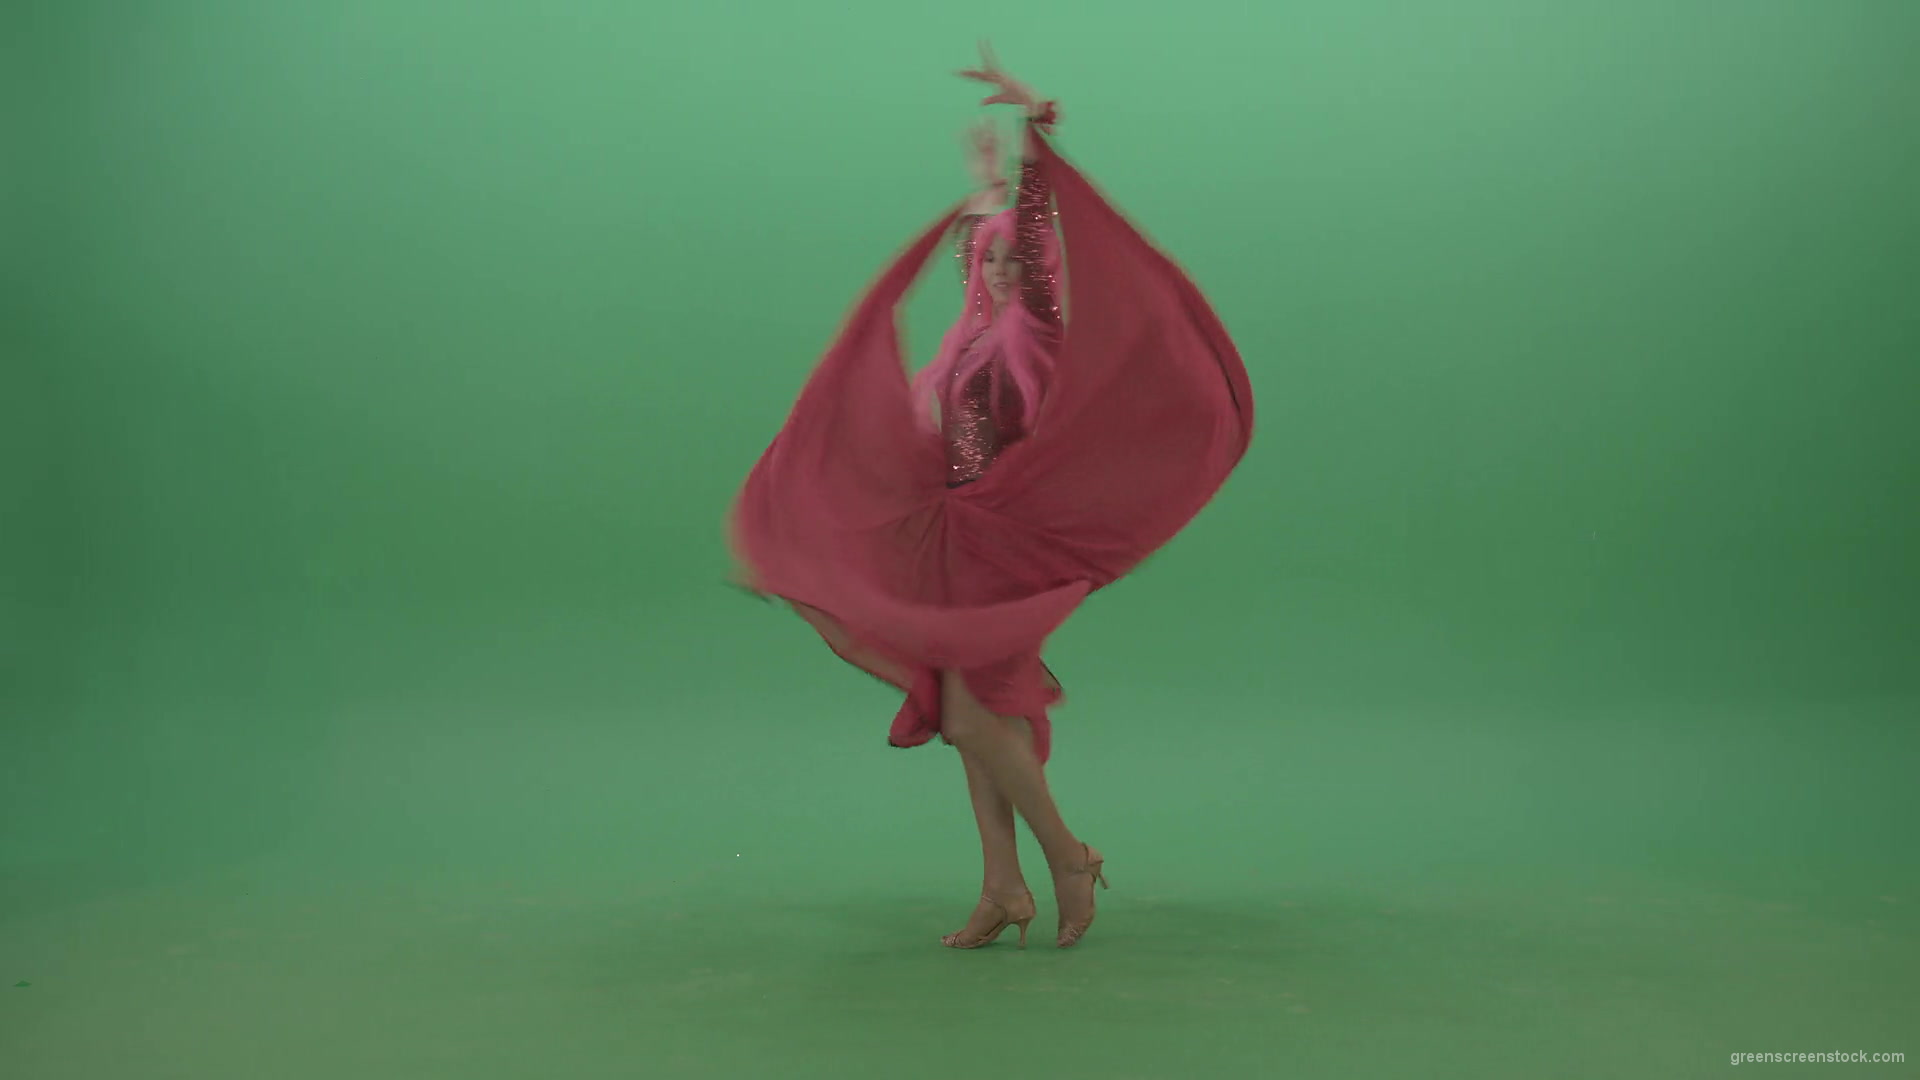 Beautiful-girl-in-red-dress-and-pink-hair-dancing-flamenco-and-spinning-on-green-screen-4K-Video-Footage-1920_006 Green Screen Stock